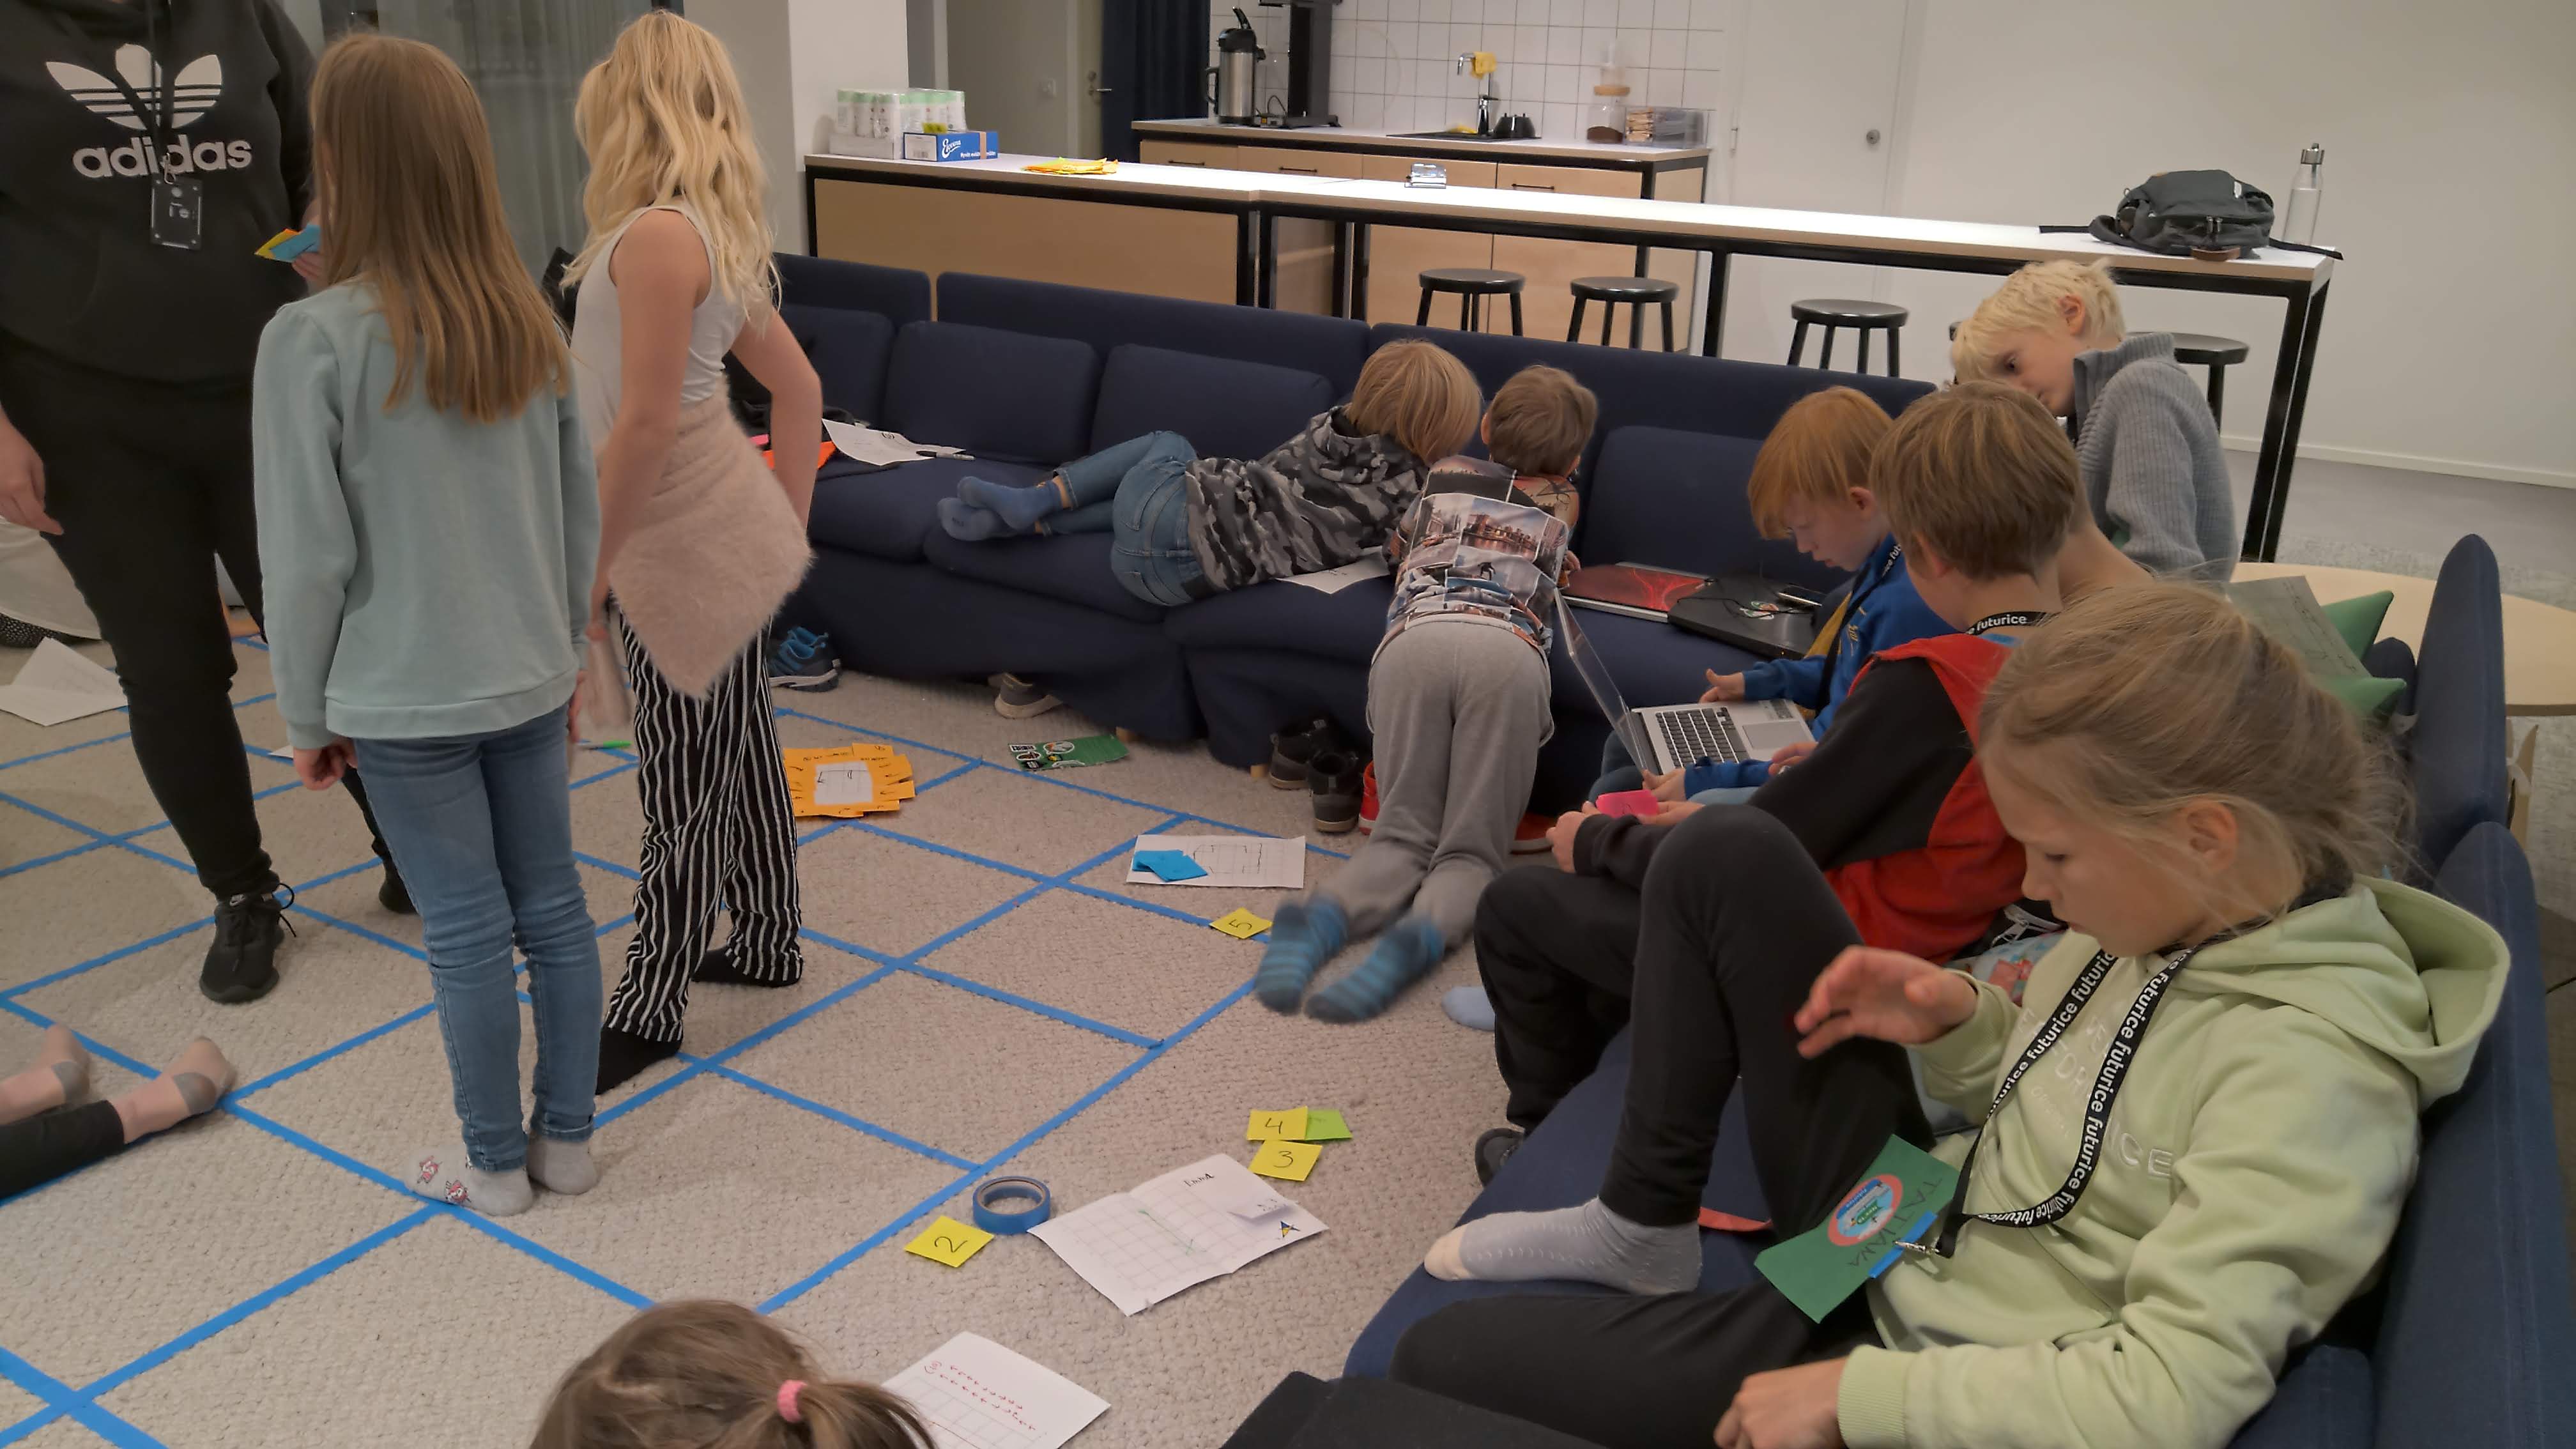 A square grid on the floor made with blue tape, children playing around the floor and sofas